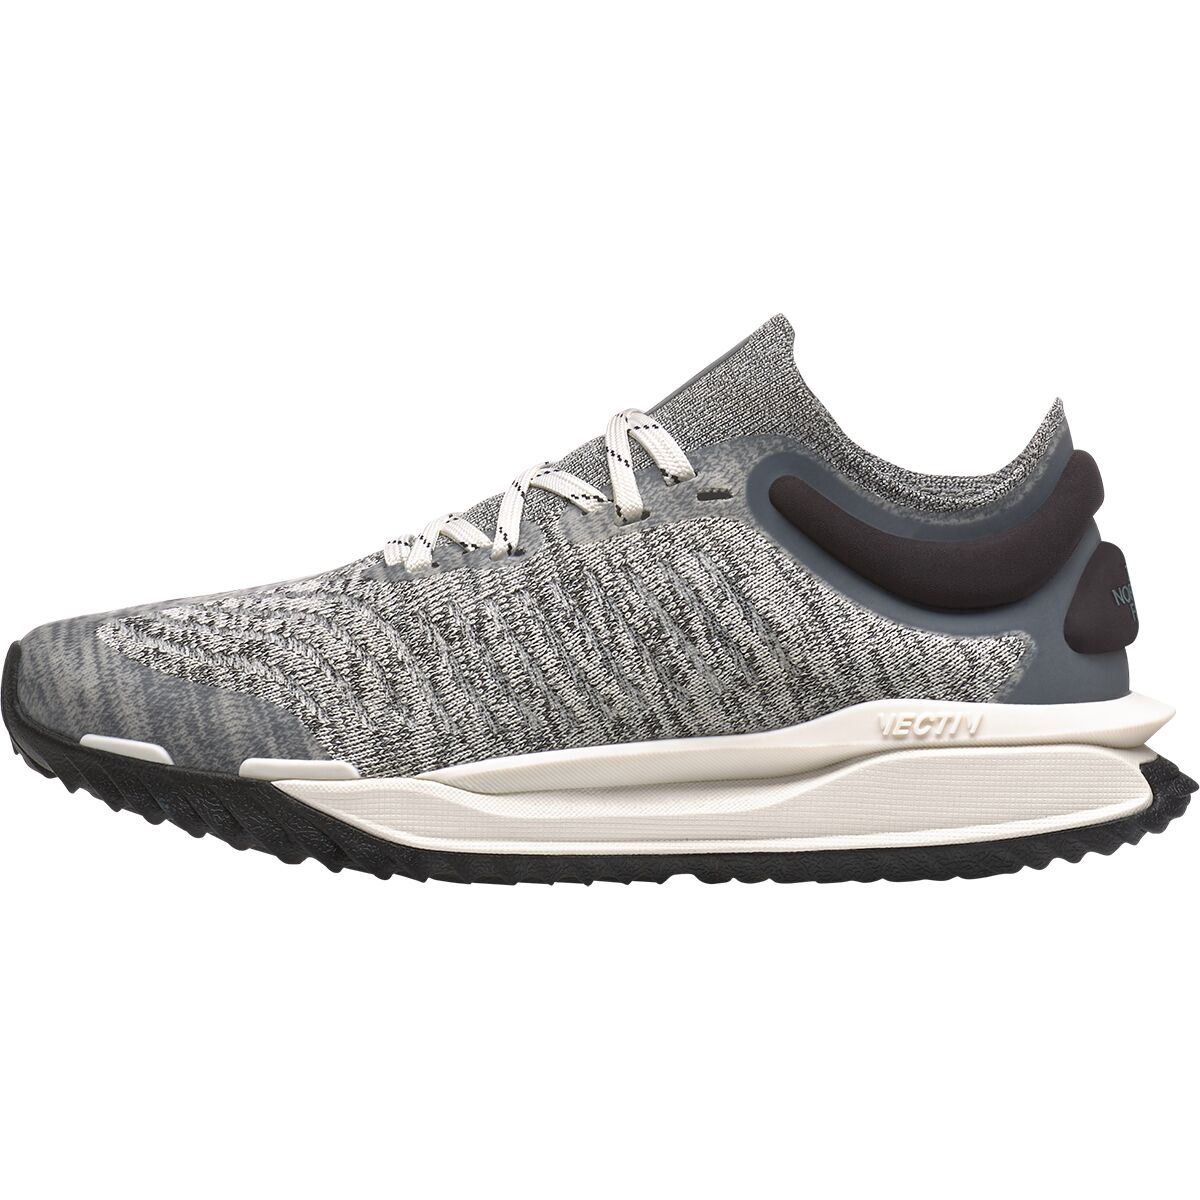 The North Face VECTIV Escape Knit Running Shoe - Women's - Footwear